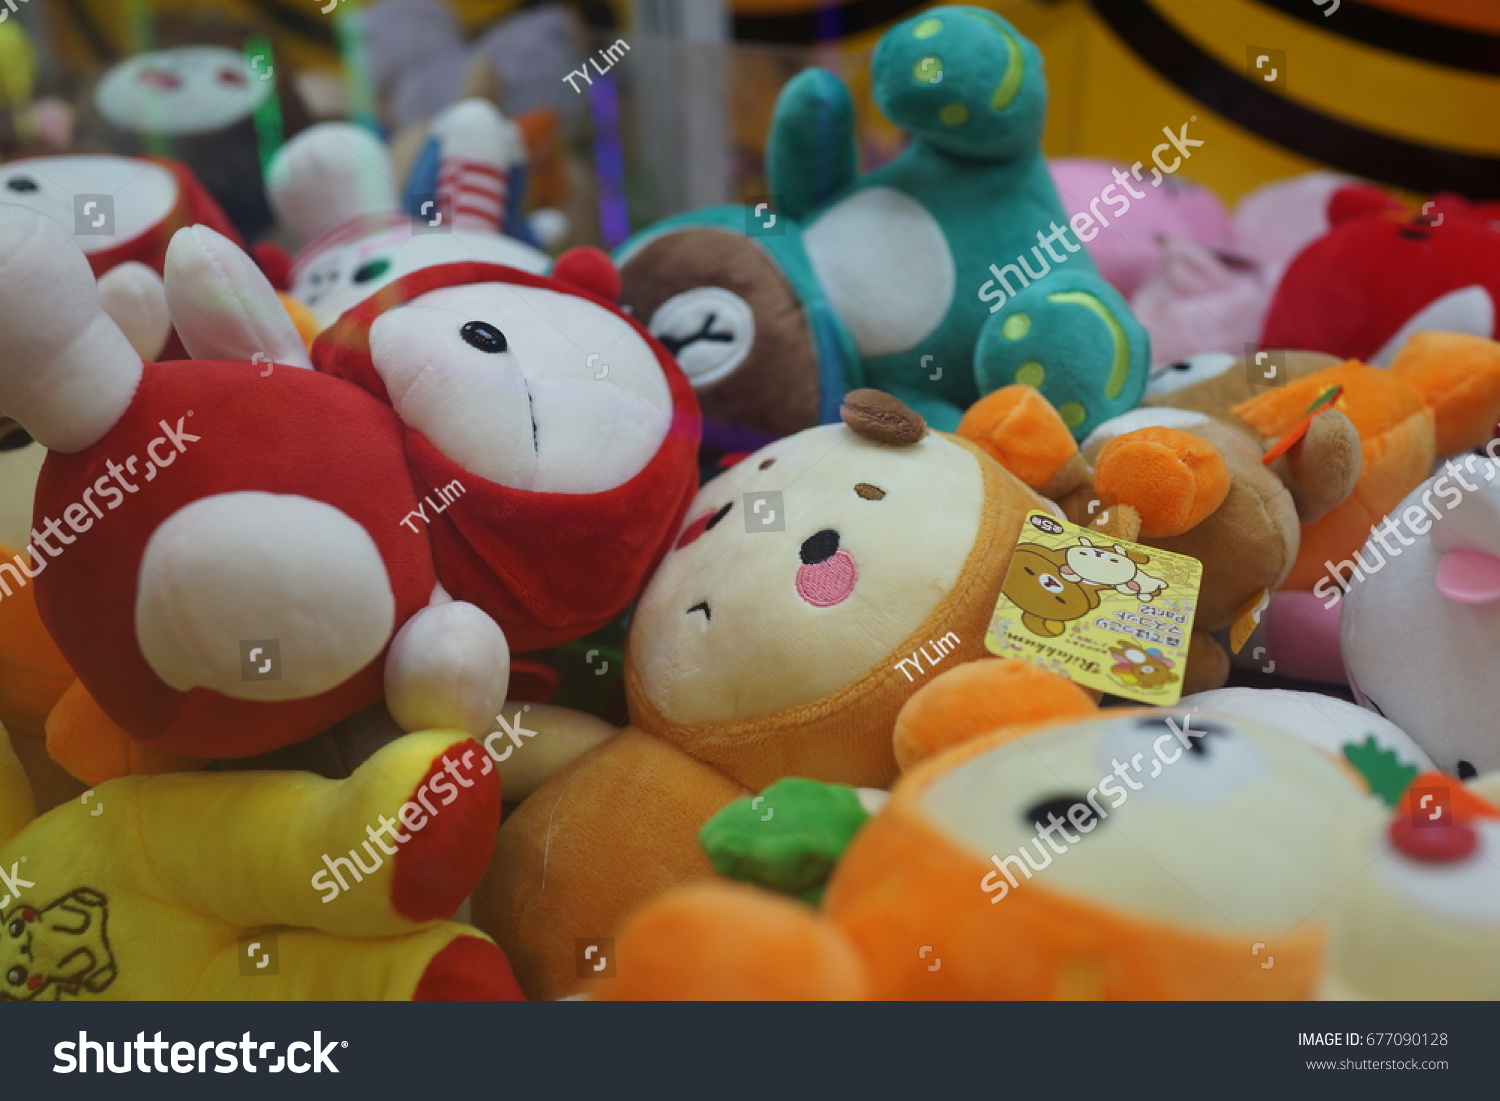 PENANG, MALAYSIA - JULY 13, 2017 : A street claw crane game machine in game center. Claw crane game machines are a frequent sight in japanese cities. #677090128